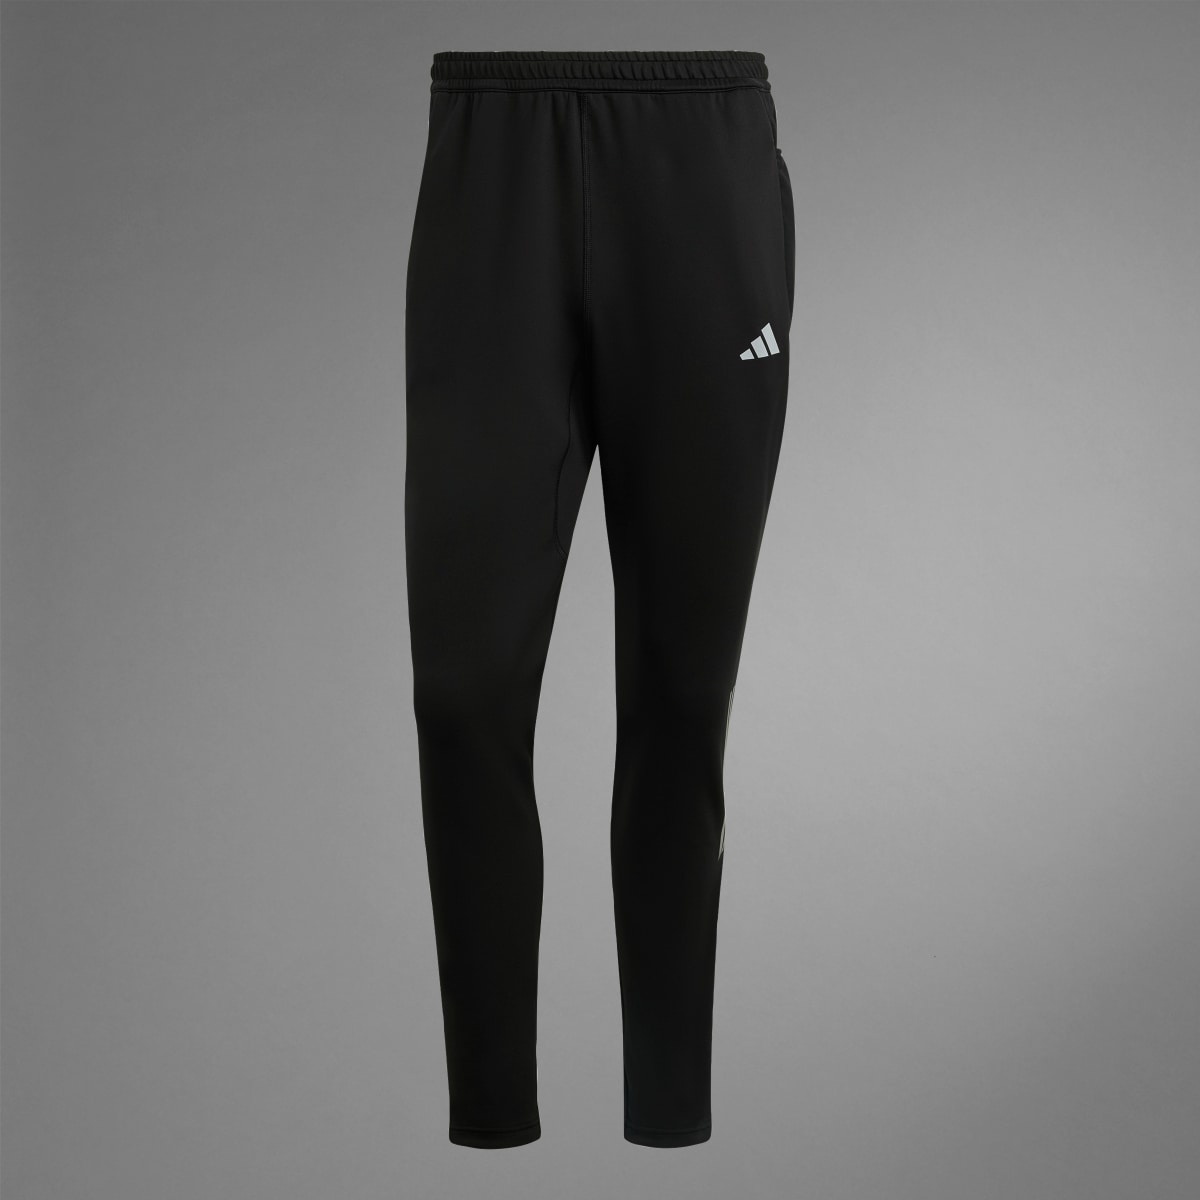 Adidas Own the Run Astro Knit Joggers. 9